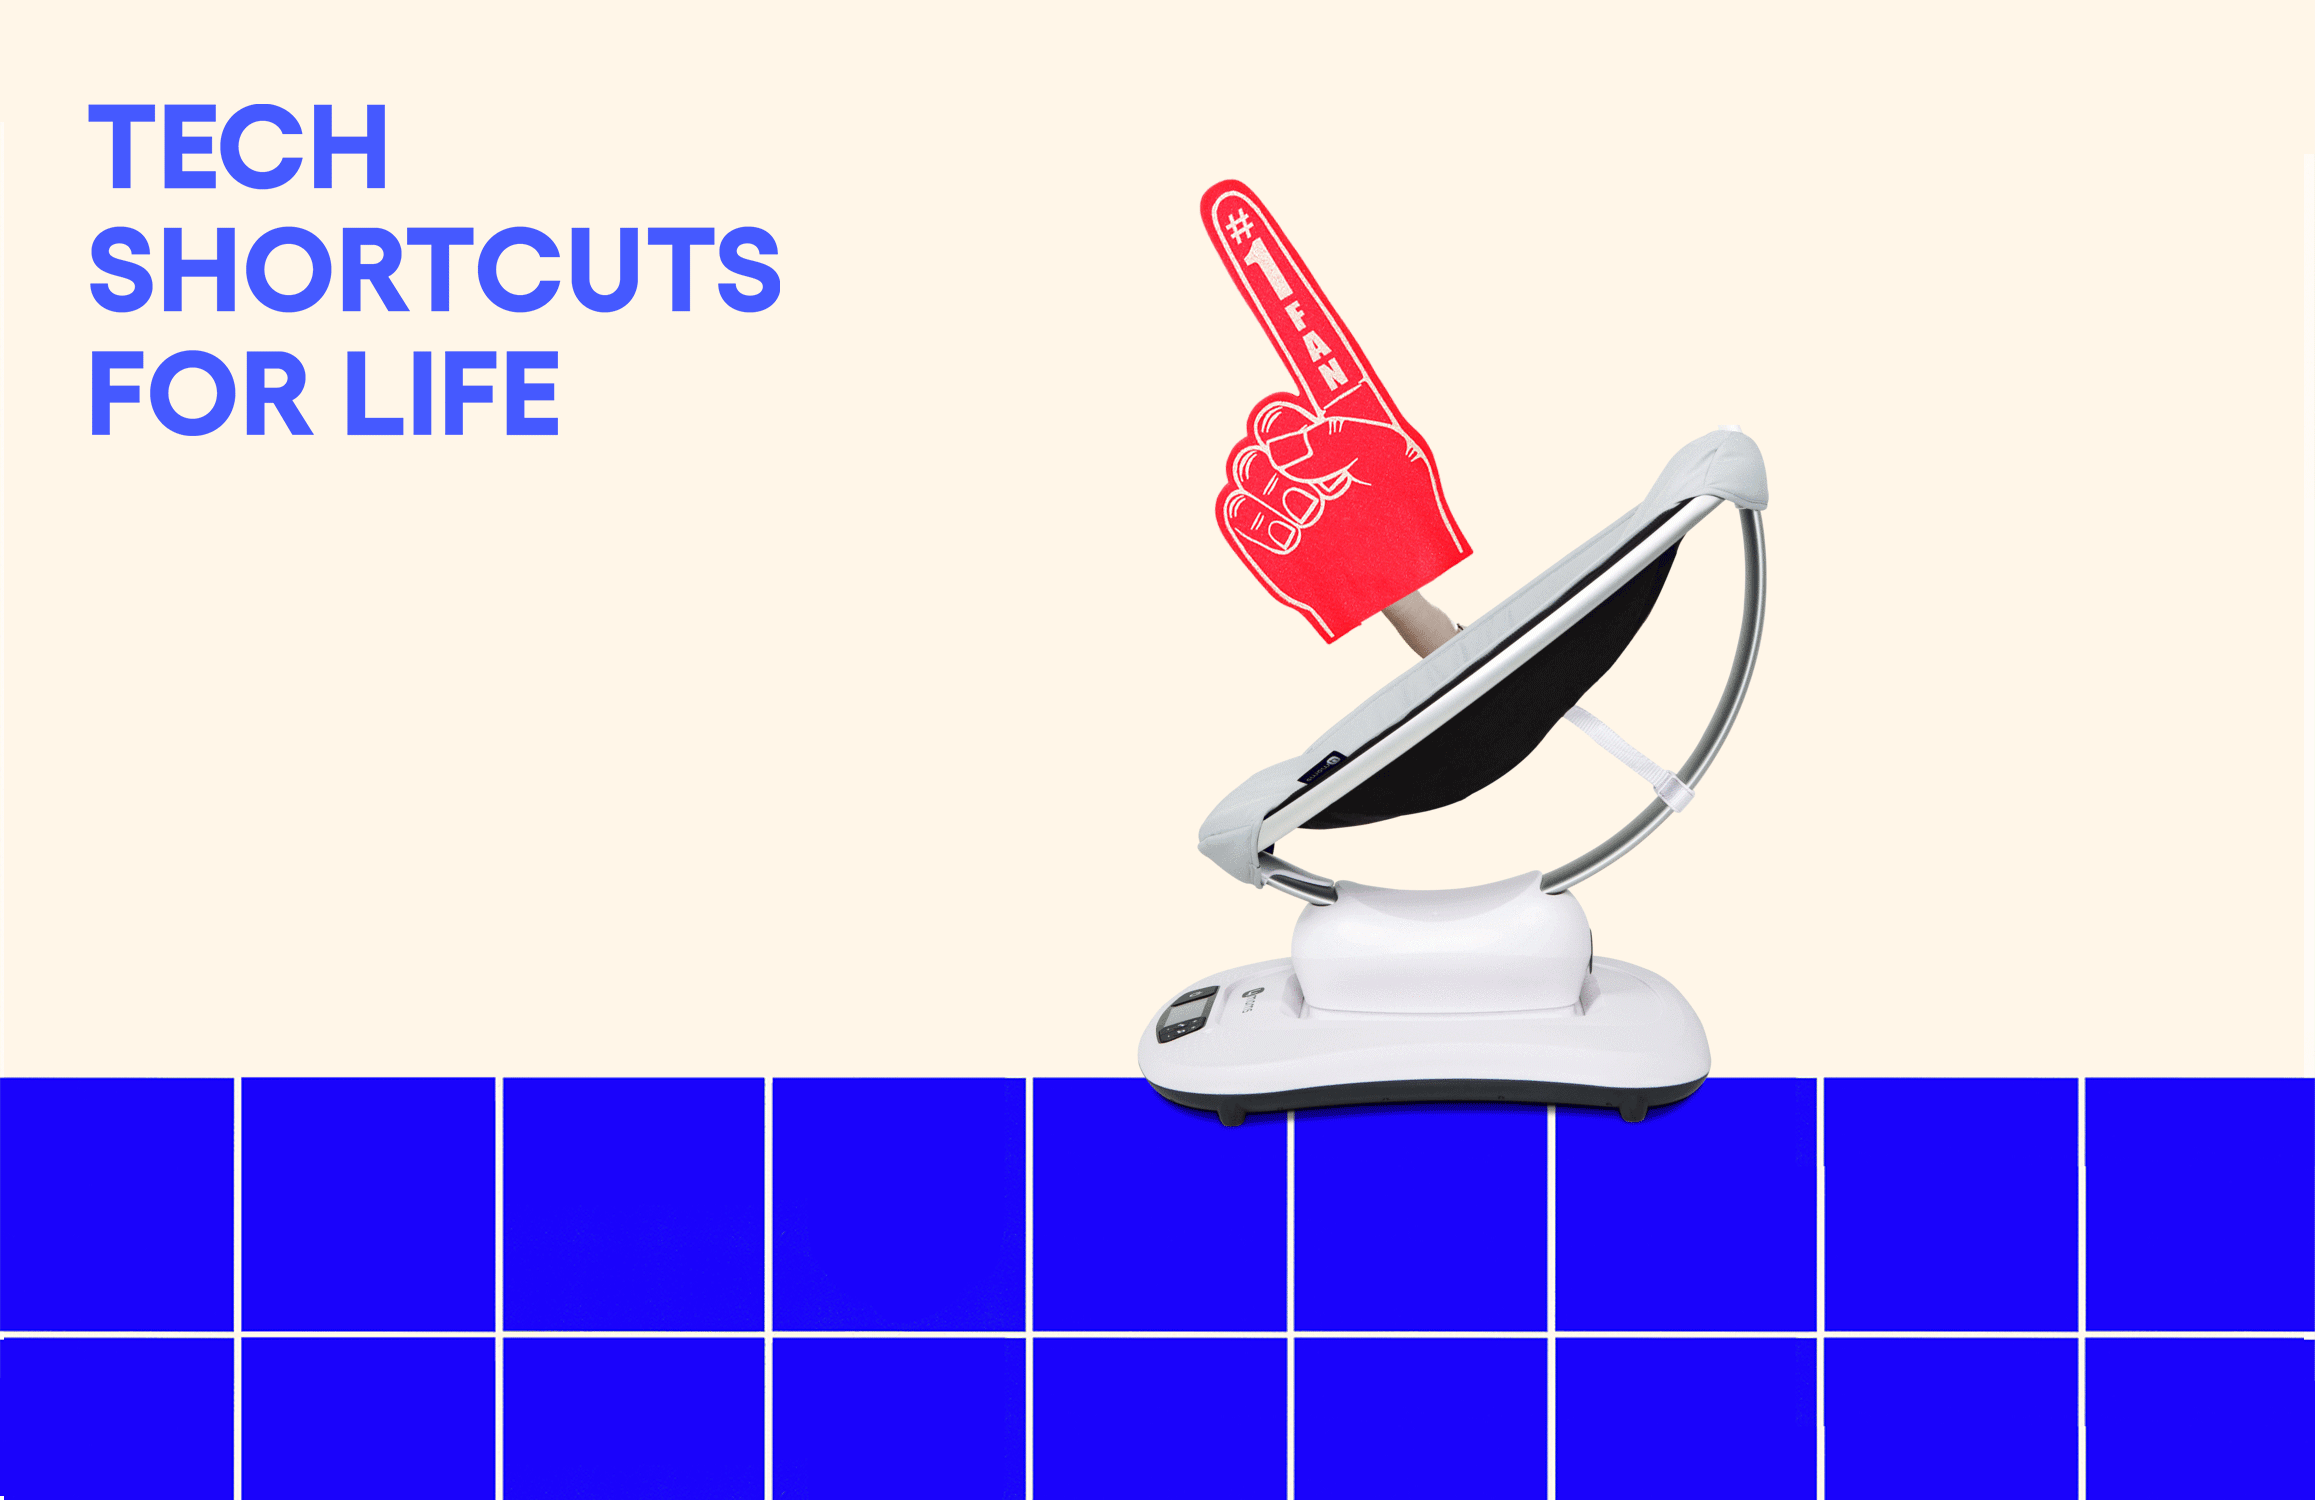 “Tech Shortcuts for Life” text next to a waving foam finger sticking out of a mamaRoo baby bouncer.